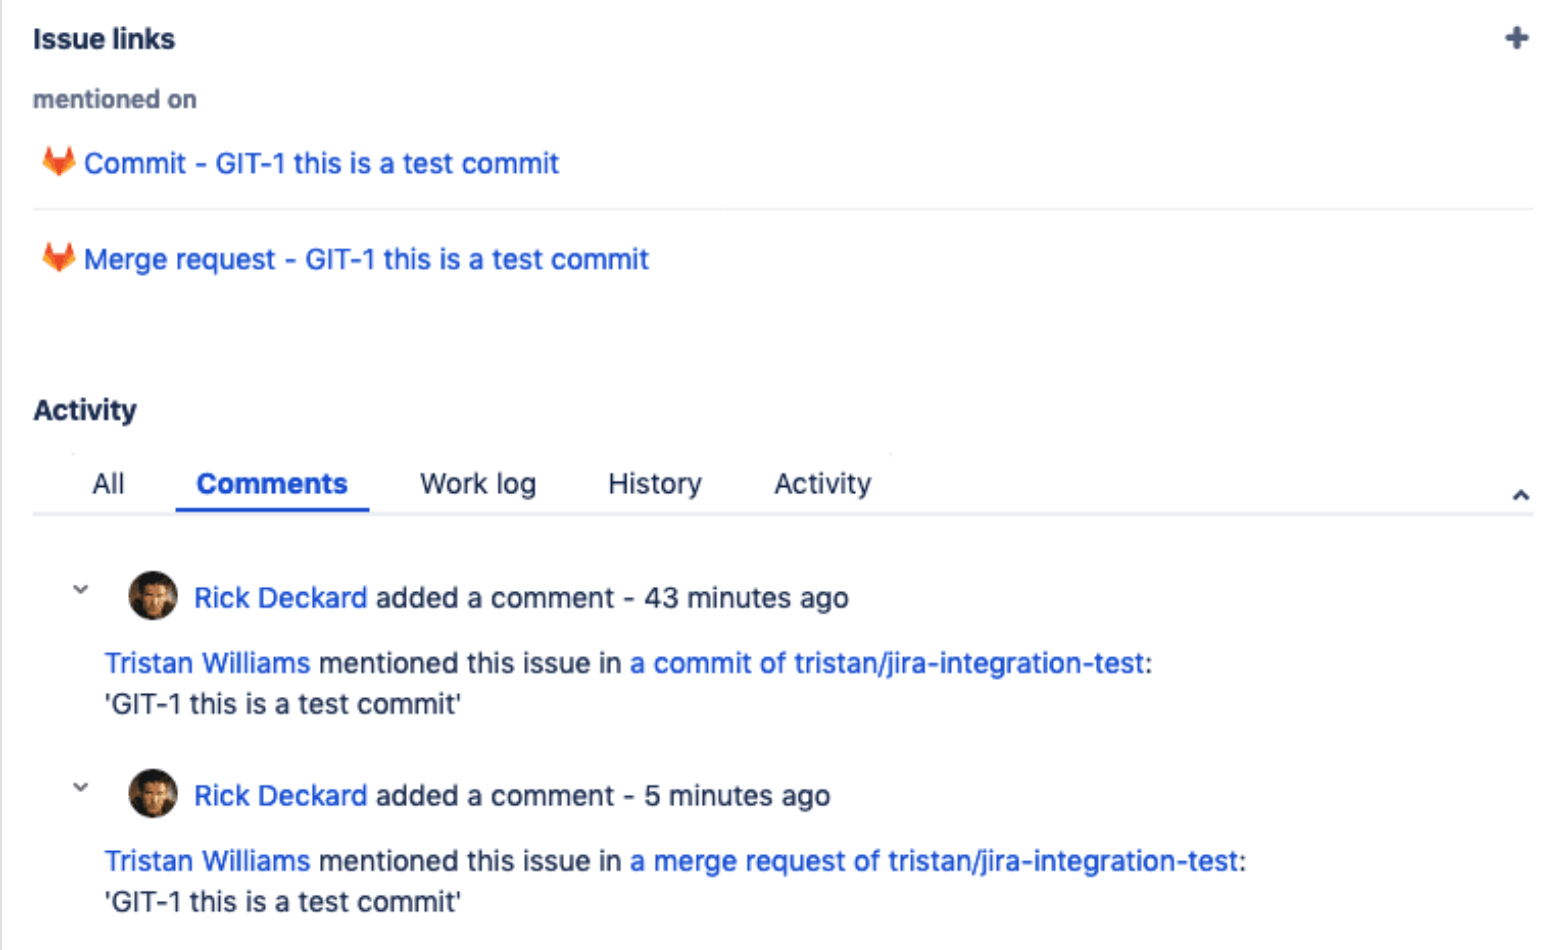 Reference Jira issues